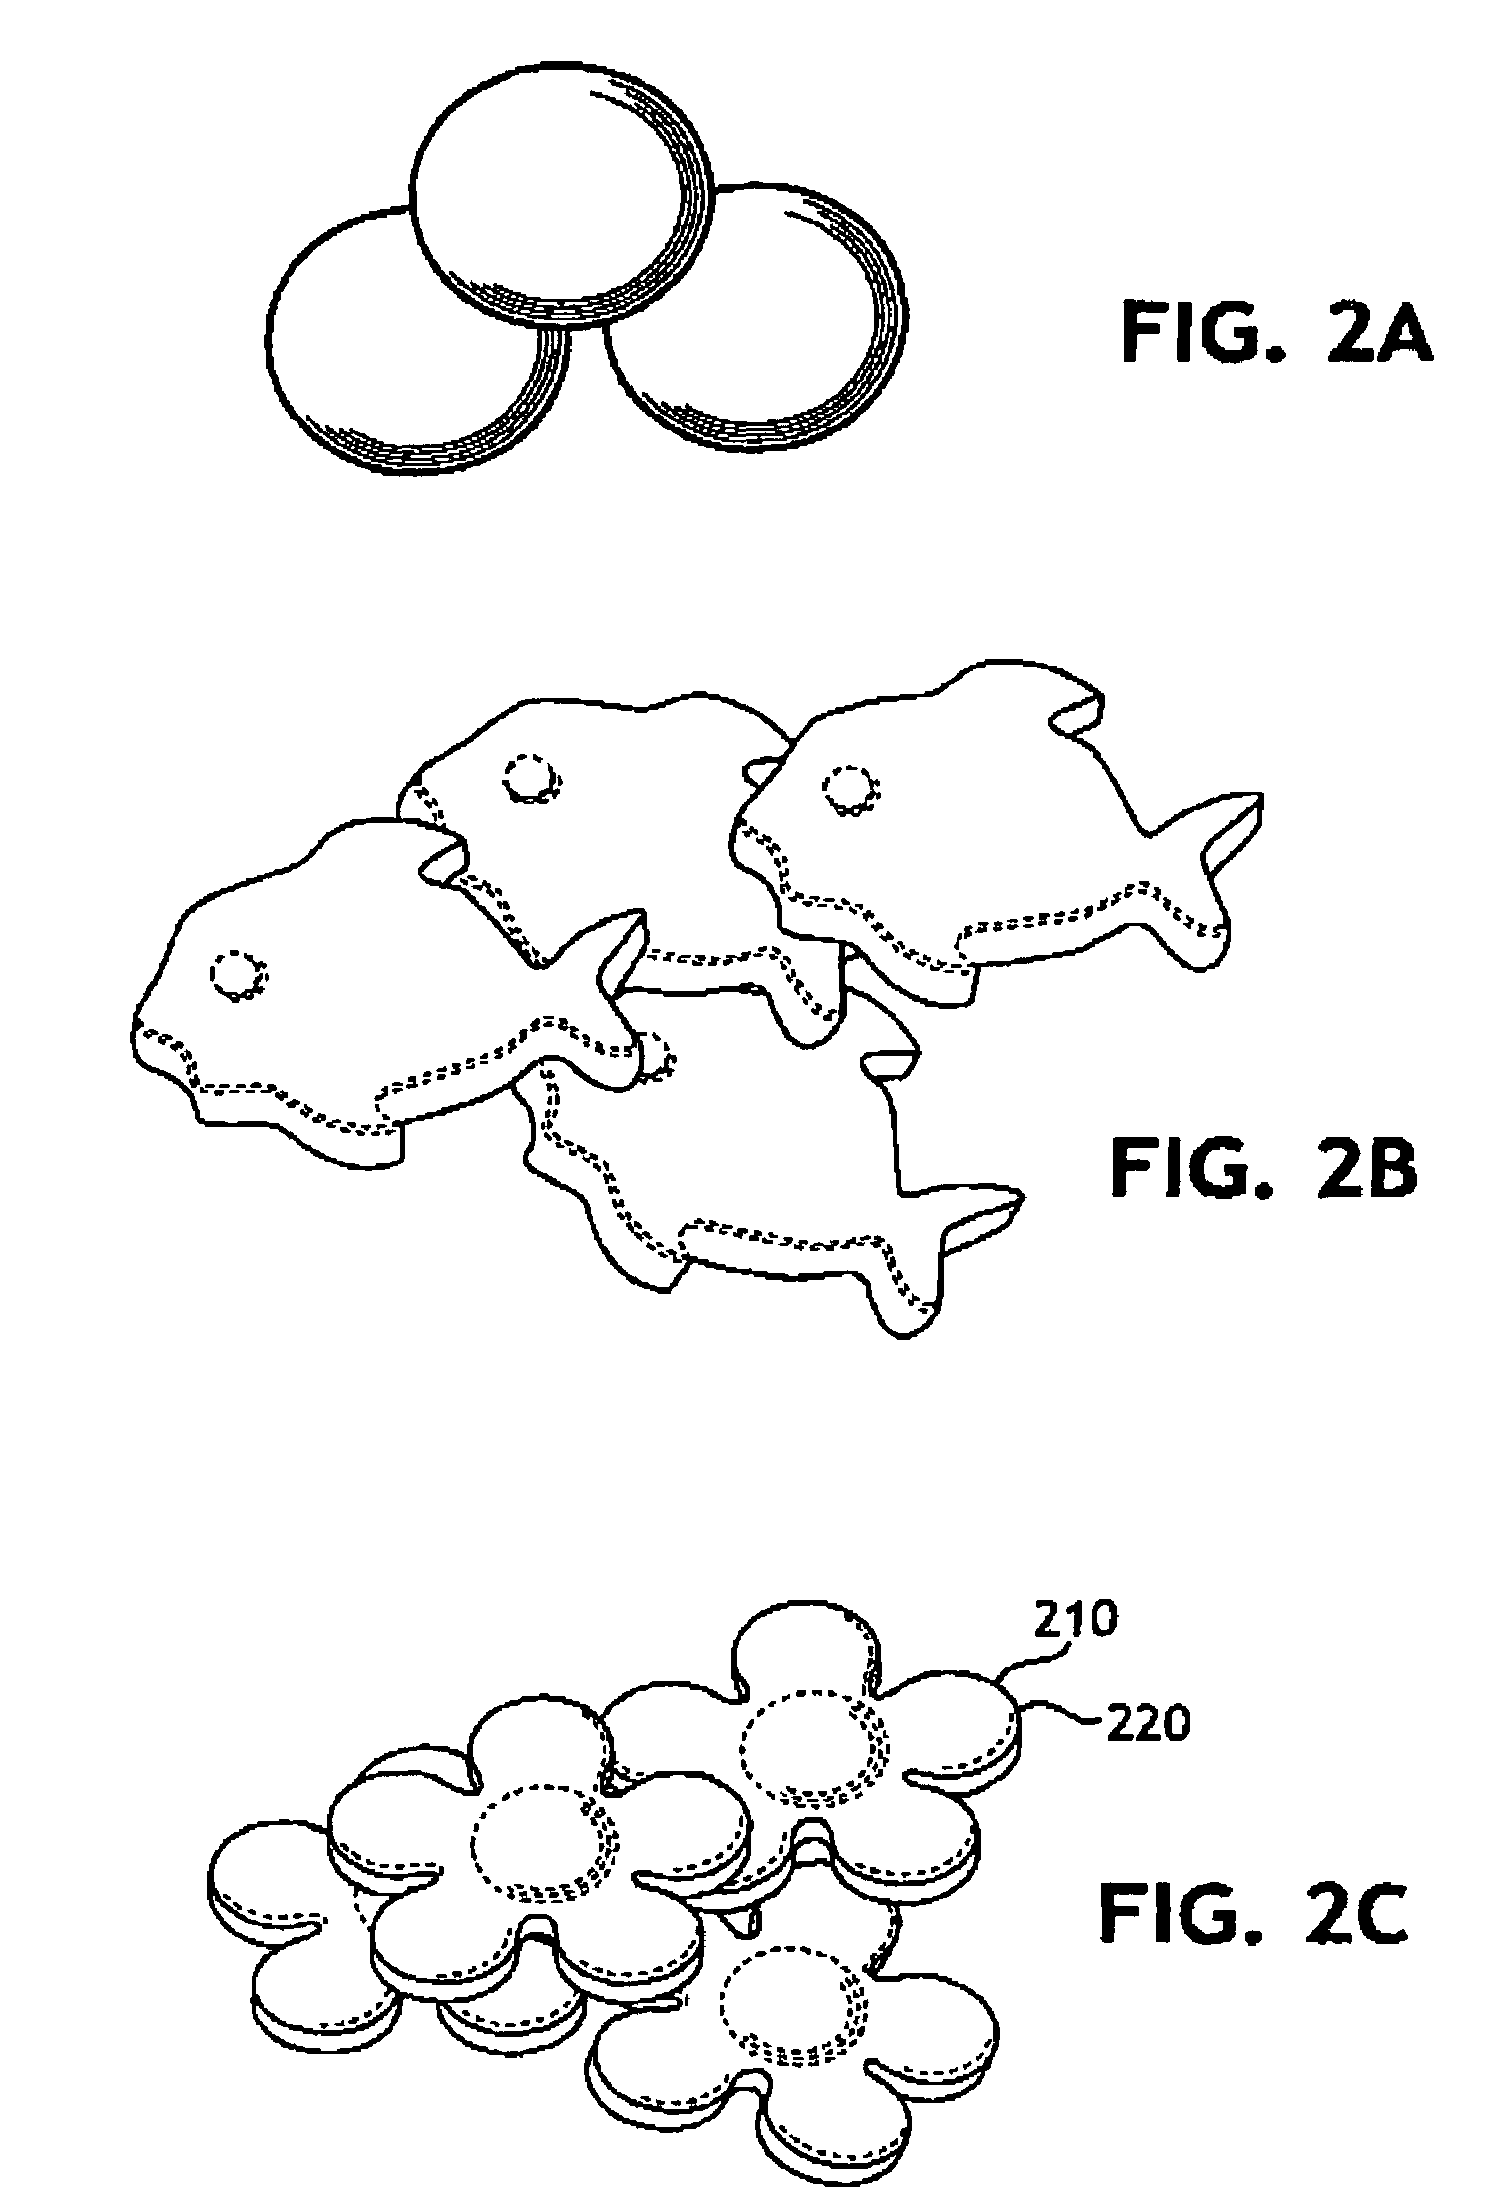 Health-and-hygiene appliance comprising a dispersible component and a releasable component disposed adjacent or proximate to said dispersible component; and processes for making said appliance